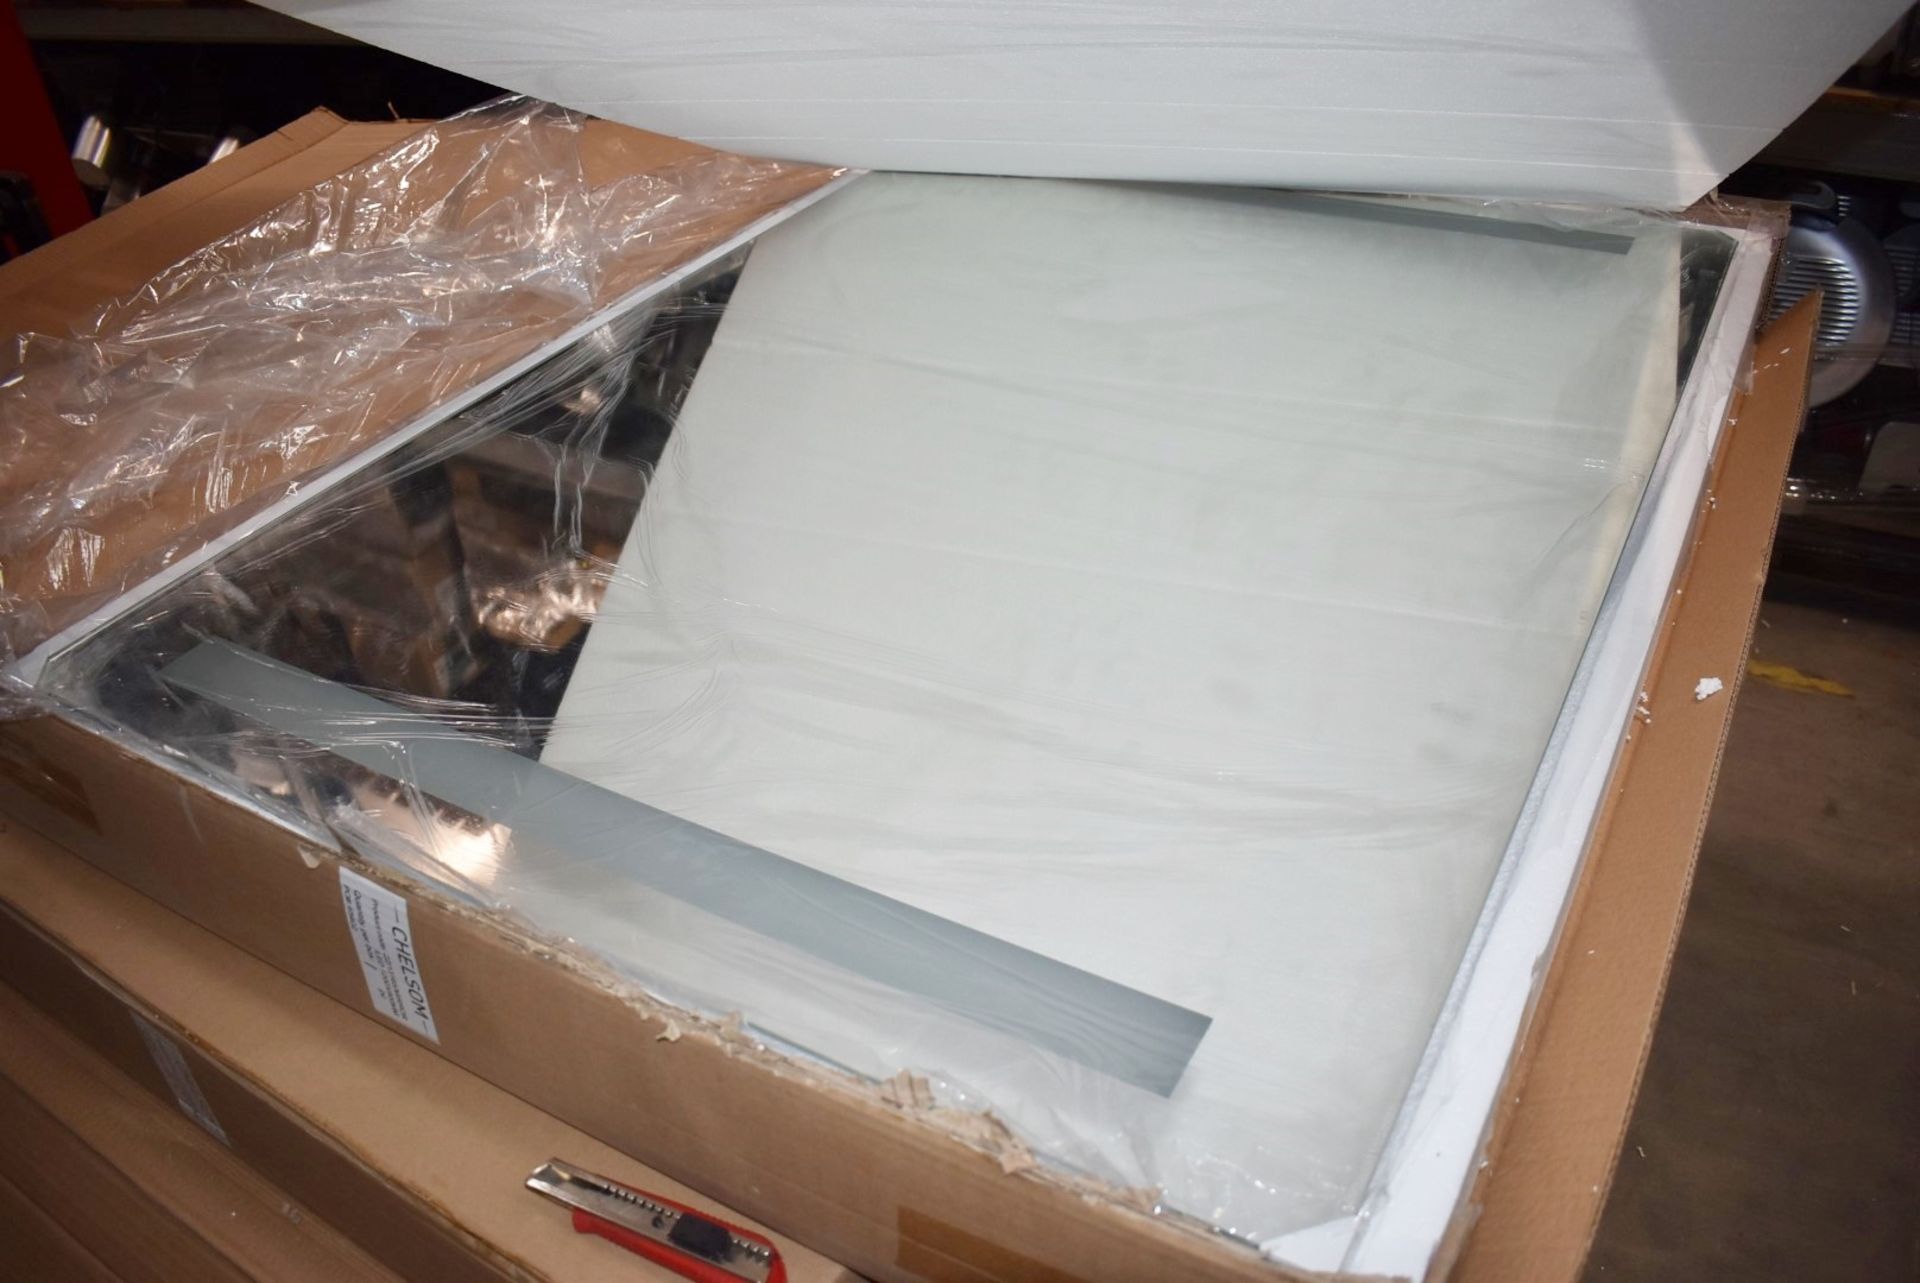 1 x Chelsom Large Illuminated LED Bathroom Mirror With Demister - Brand New Stock - As Used in Major - Image 9 of 13